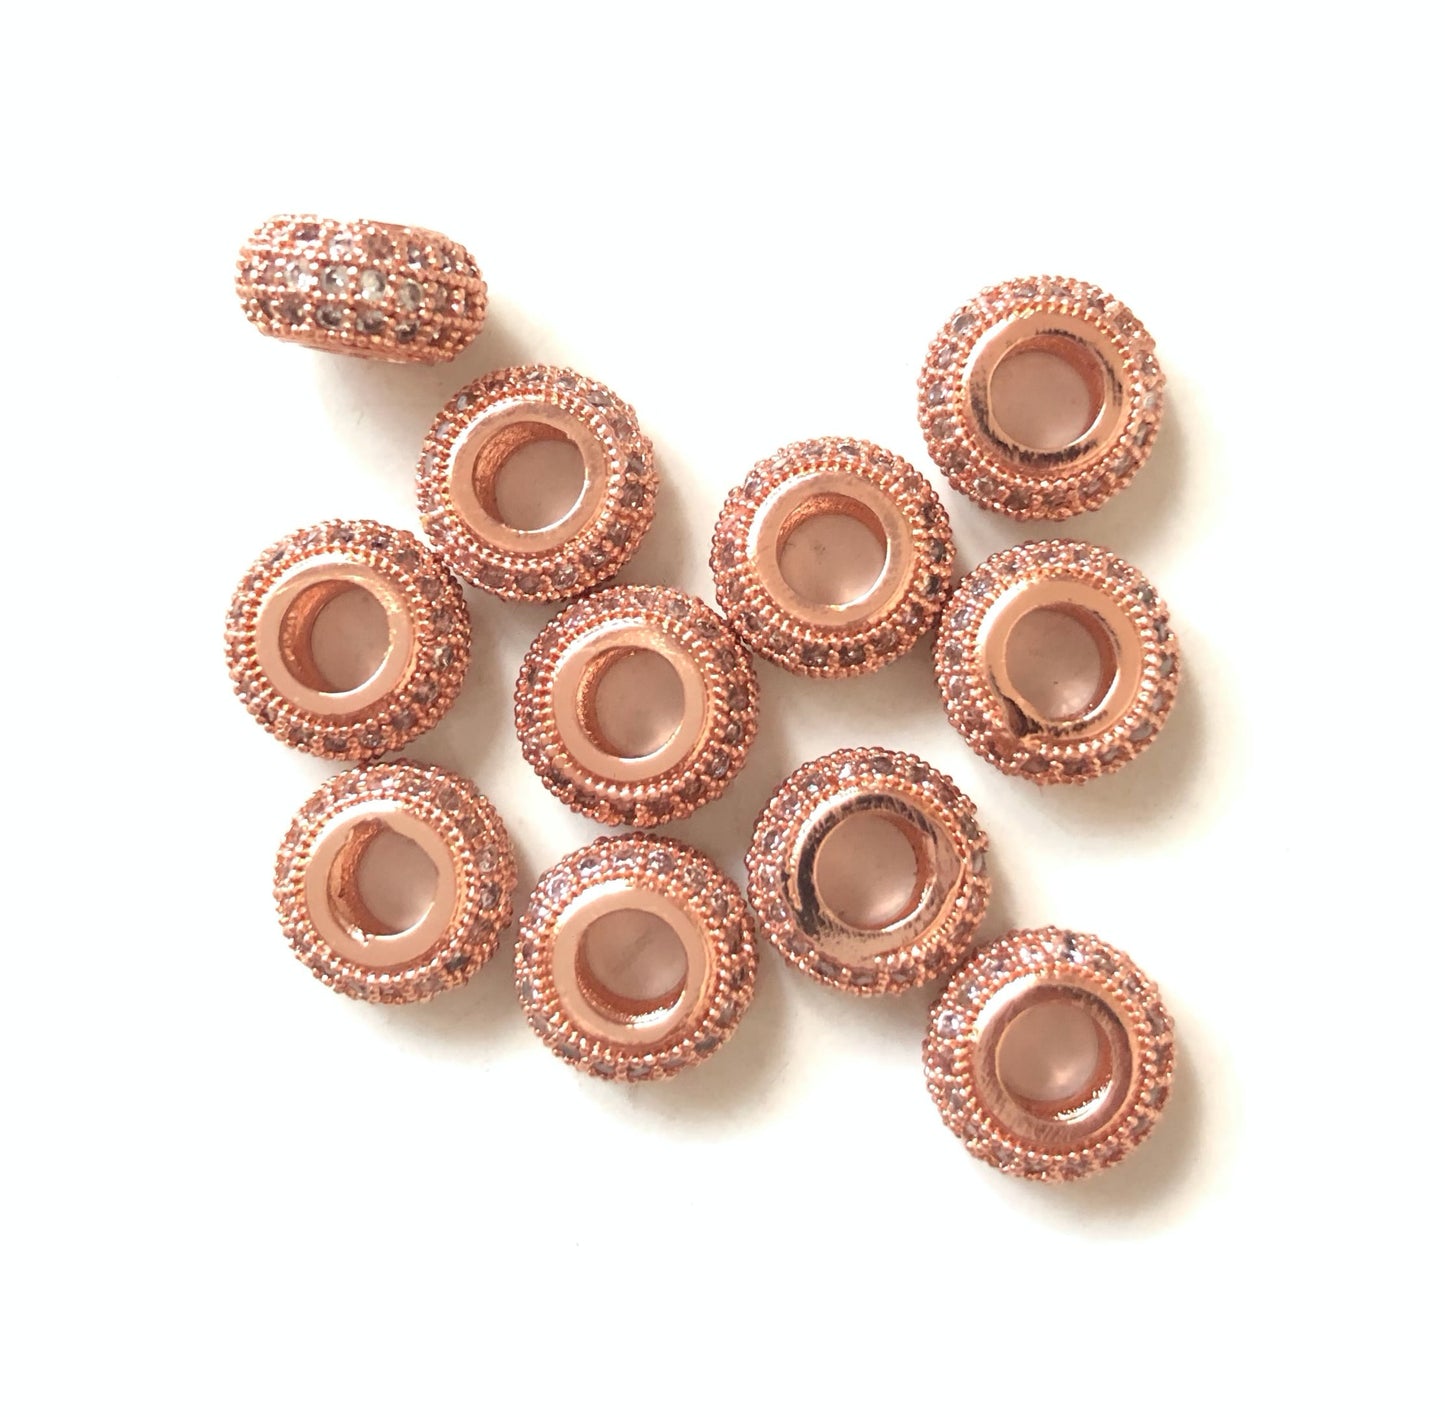 20pcs/lot 8.6*4.9mm Clear CZ Paved Wheel Rondelle Spacers Rose Gold CZ Paved Spacers Rondelle Beads Charms Beads Beyond